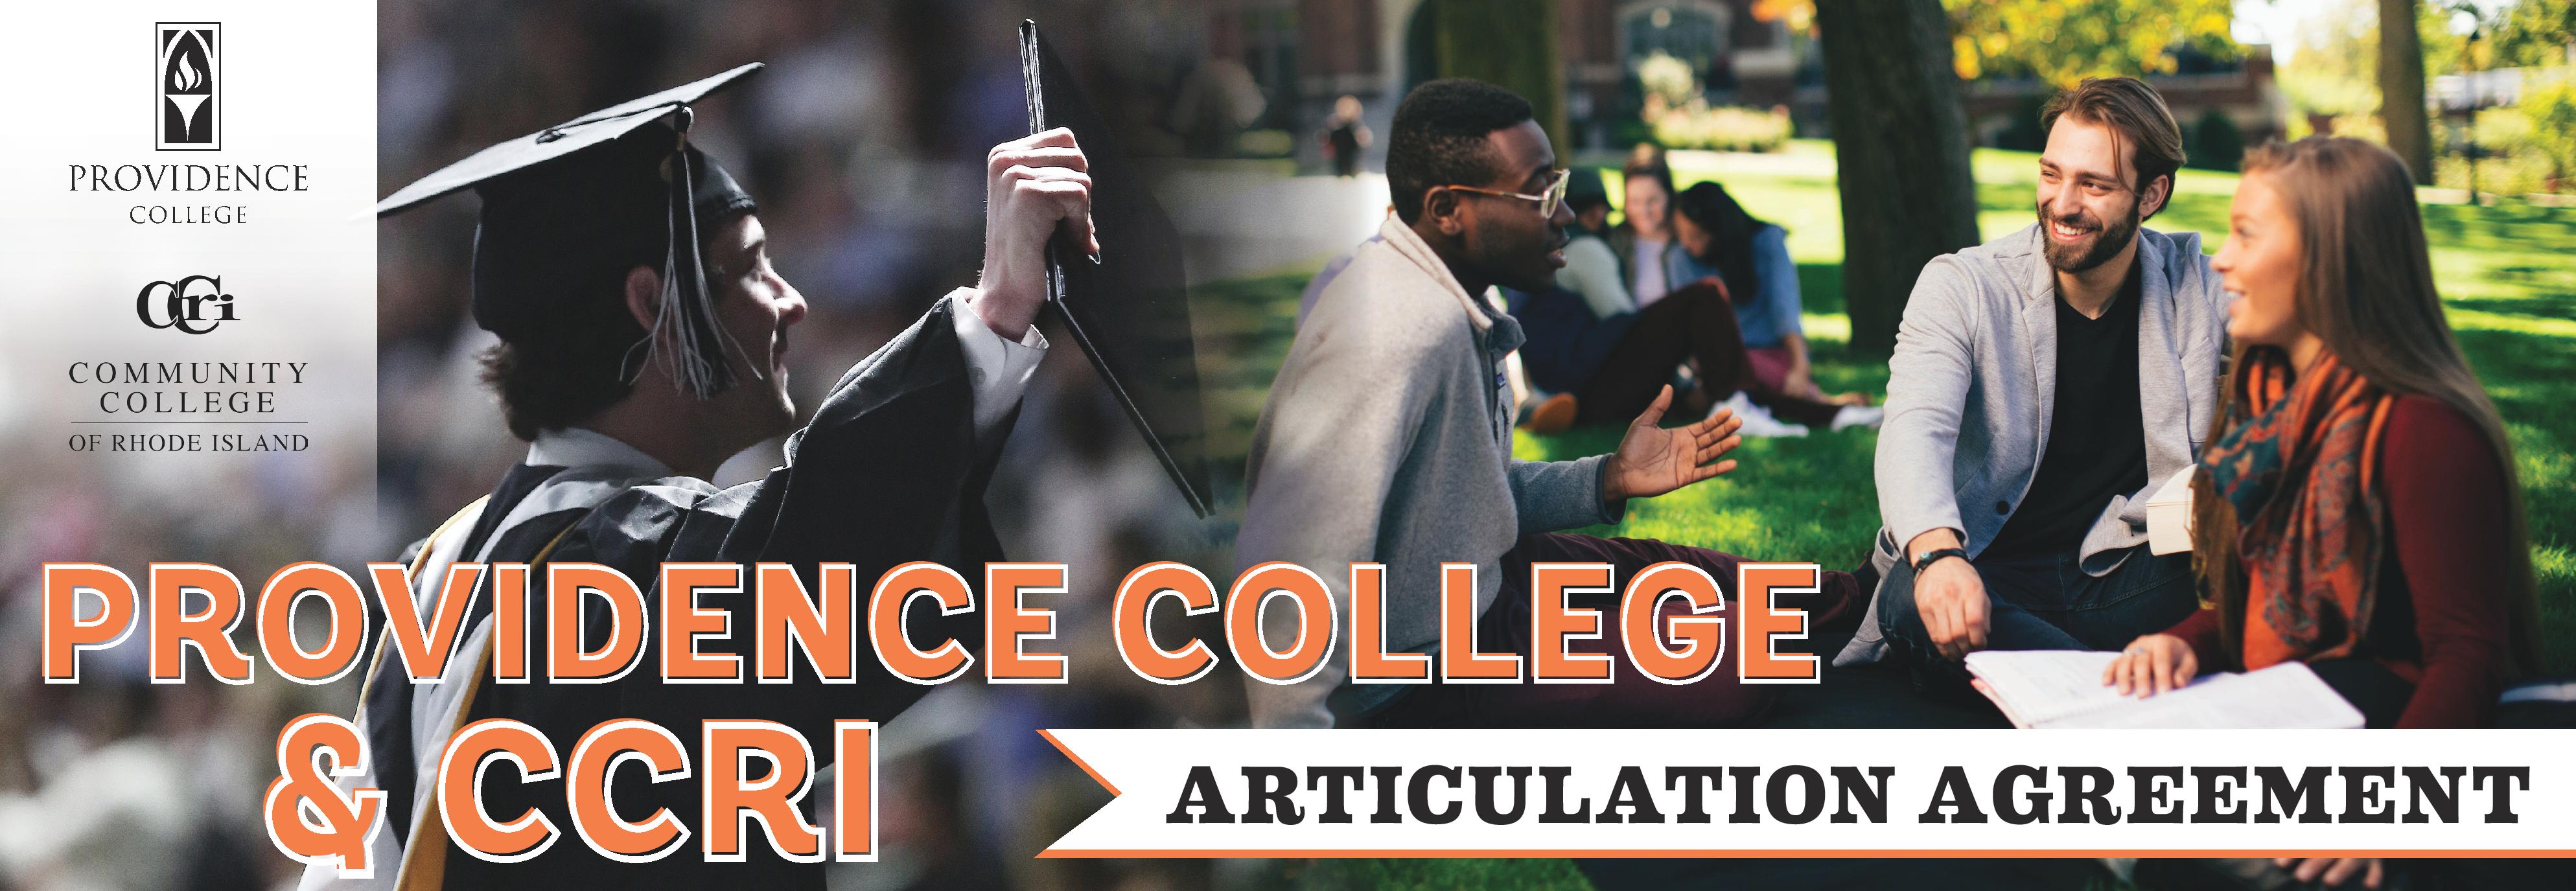 Providence College & CCRI Articulation Agreement